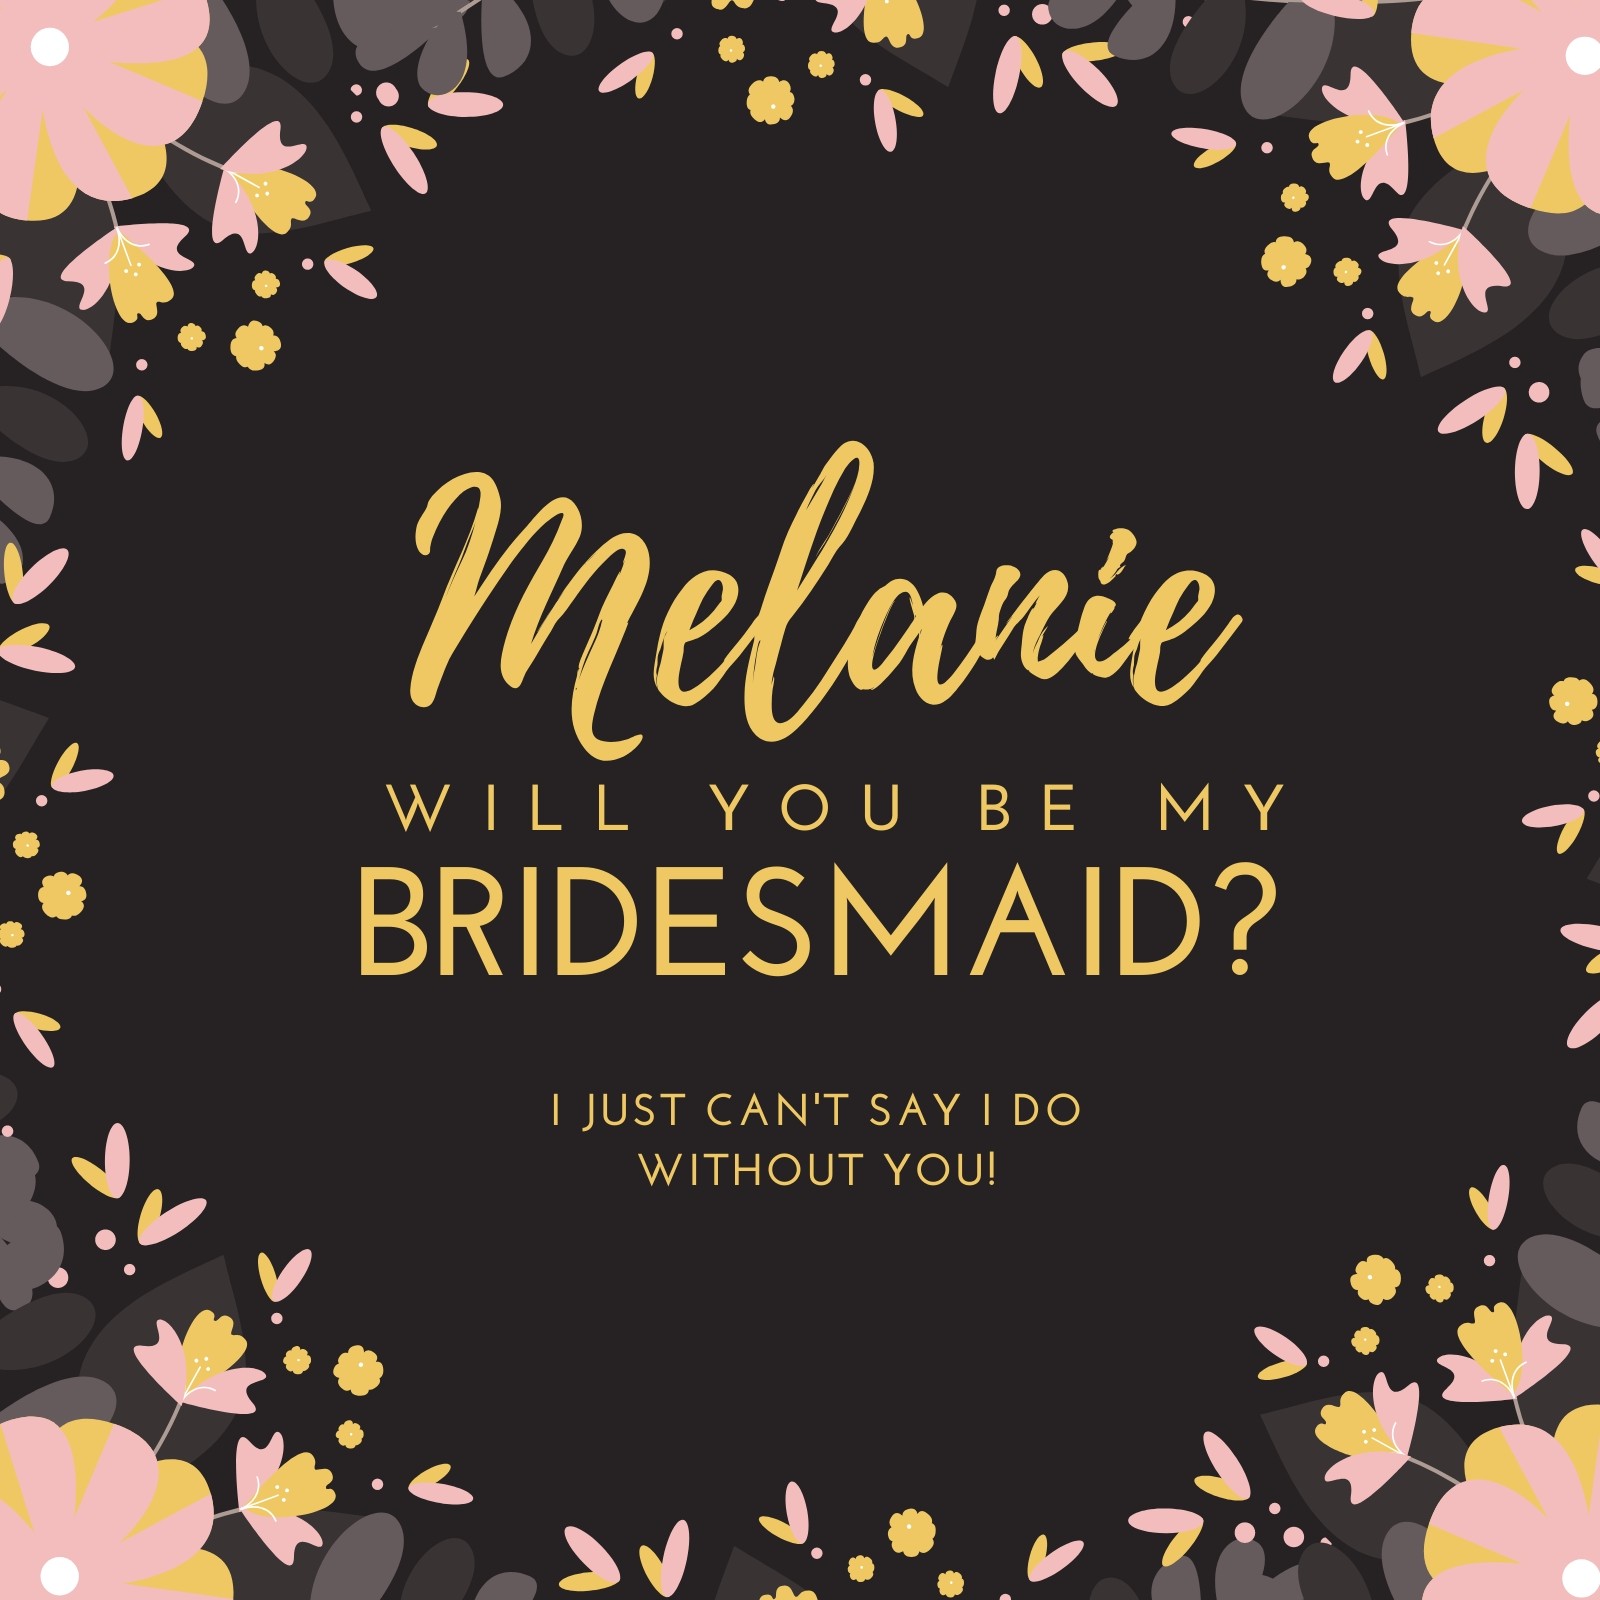 Customize 22+ Be My Bridesmaid Invitations Templates Online - Canva Throughout Will You Be My Bridesmaid Card Template